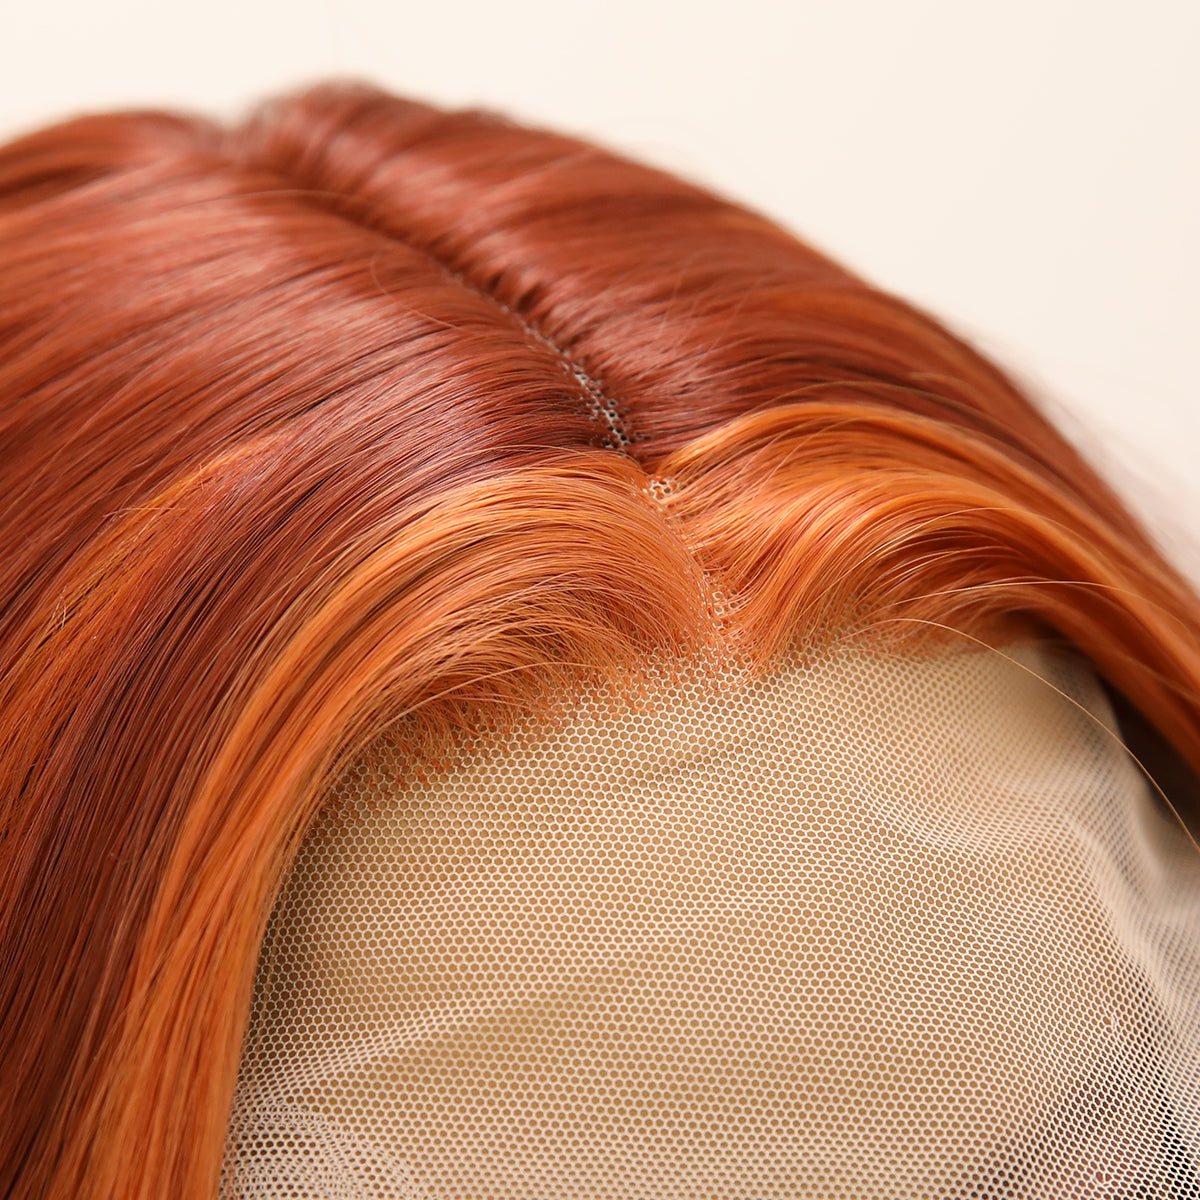 [Saffron] 30-inch Ombre Orange Loose Wave without Bangs (Synthetic Lace Front Wig)